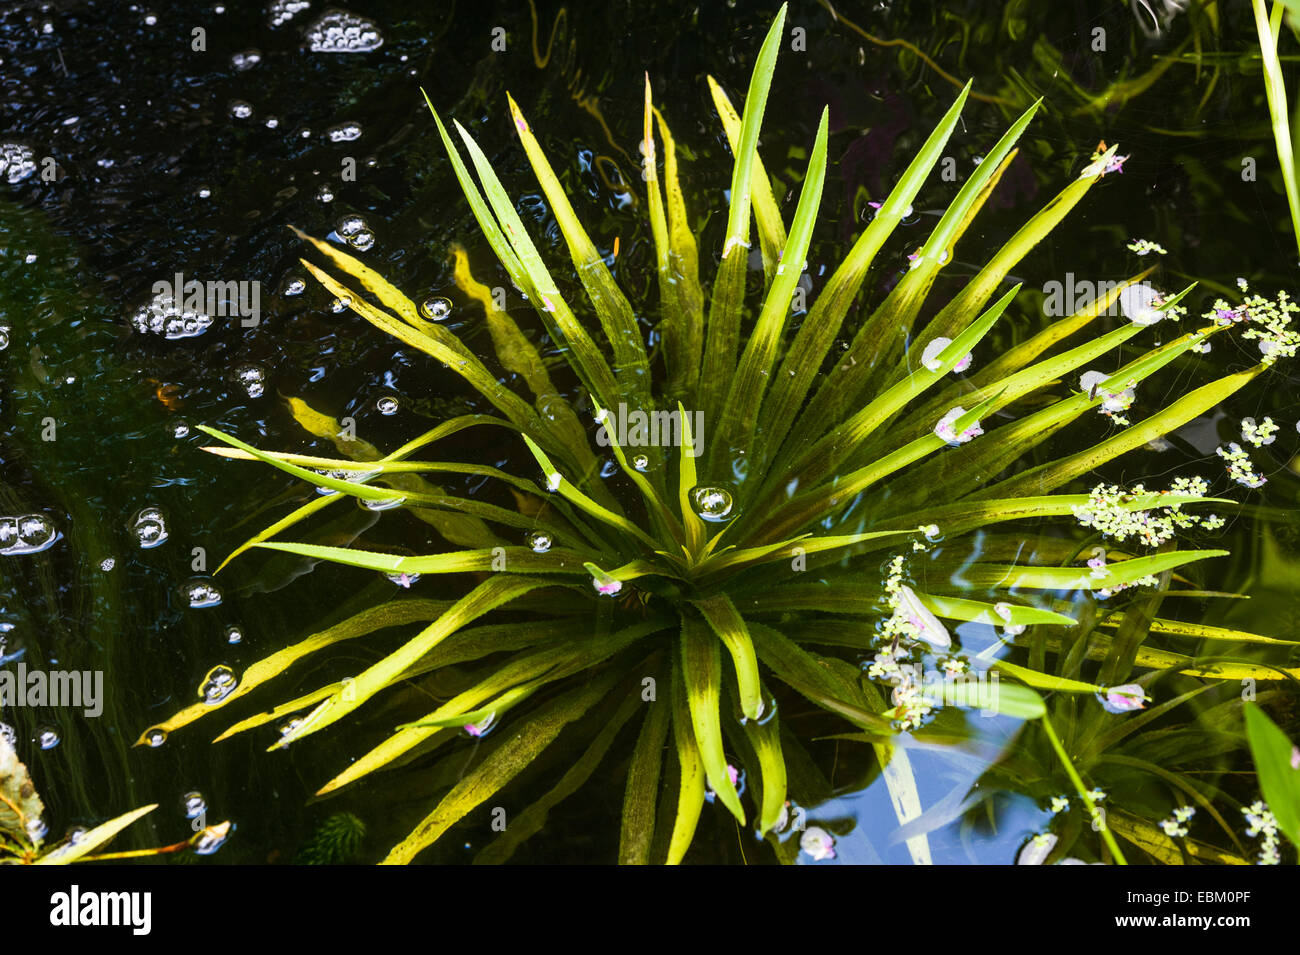 Stratiotes aloides, Water Soldier, Water Aloe. Stock Photo